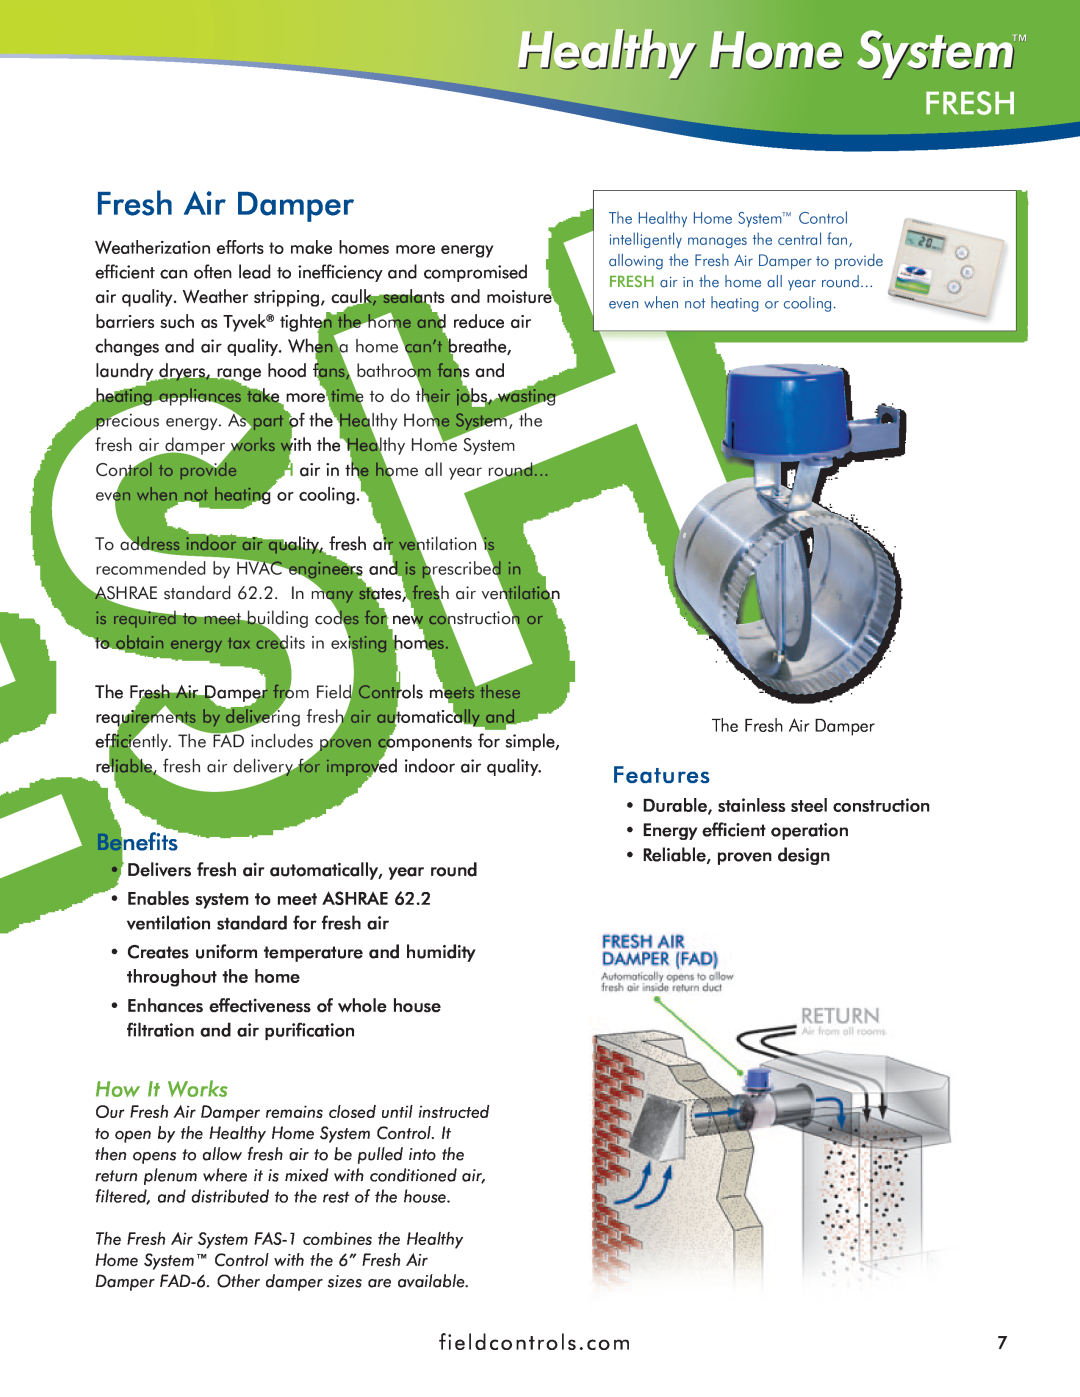 Field Controls IAQ11 manual Fresh Air Damper, Benefits, Features, How It Works 